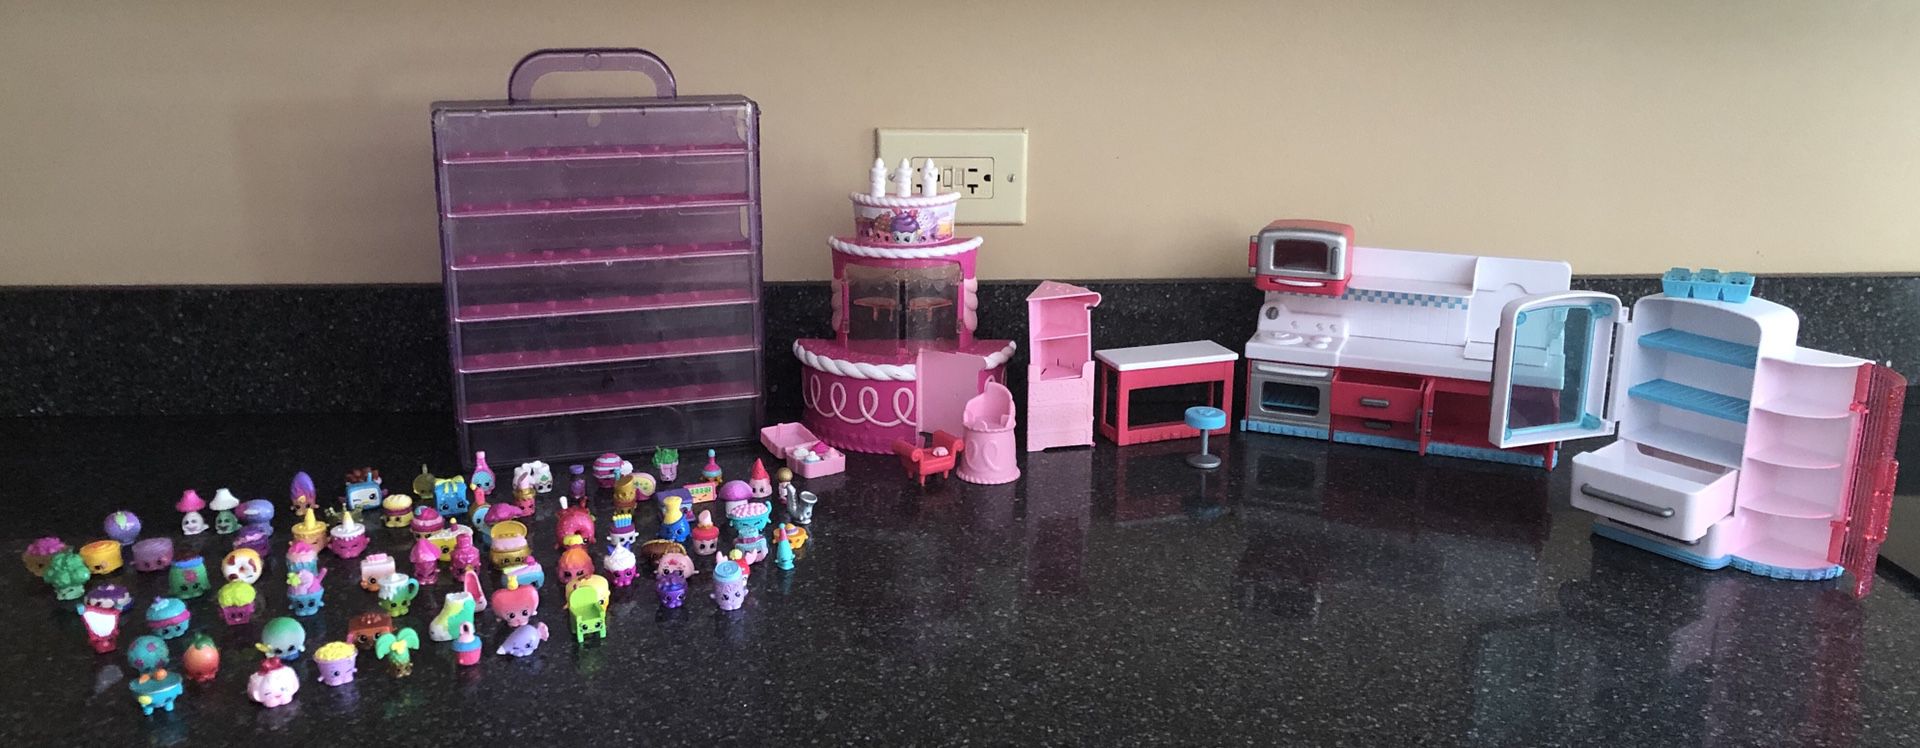 91 Shopkins, play sets and accessories